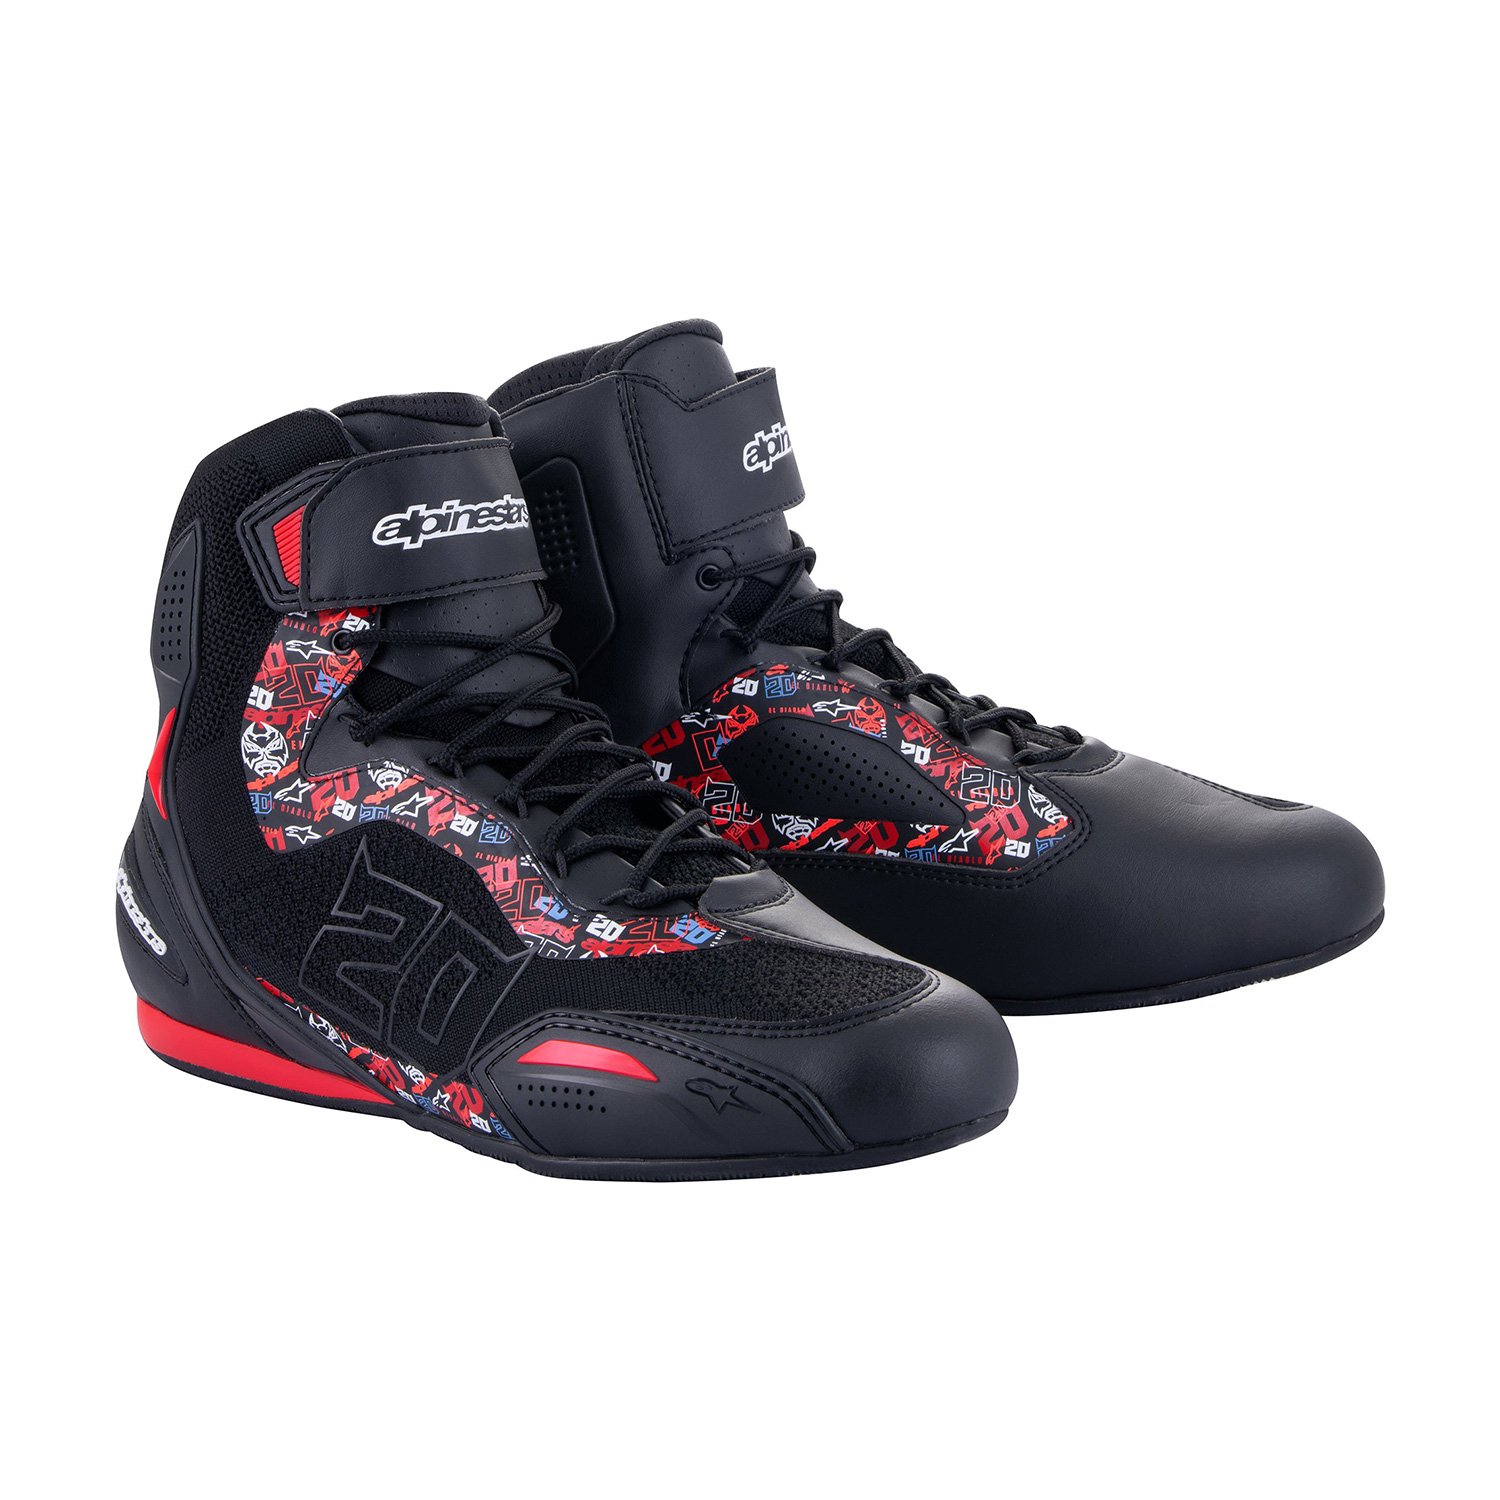 Image of Alpinestars FQ20 Faster-3 Rideknit Noir Bright Rouge Chaussures Taille US 85